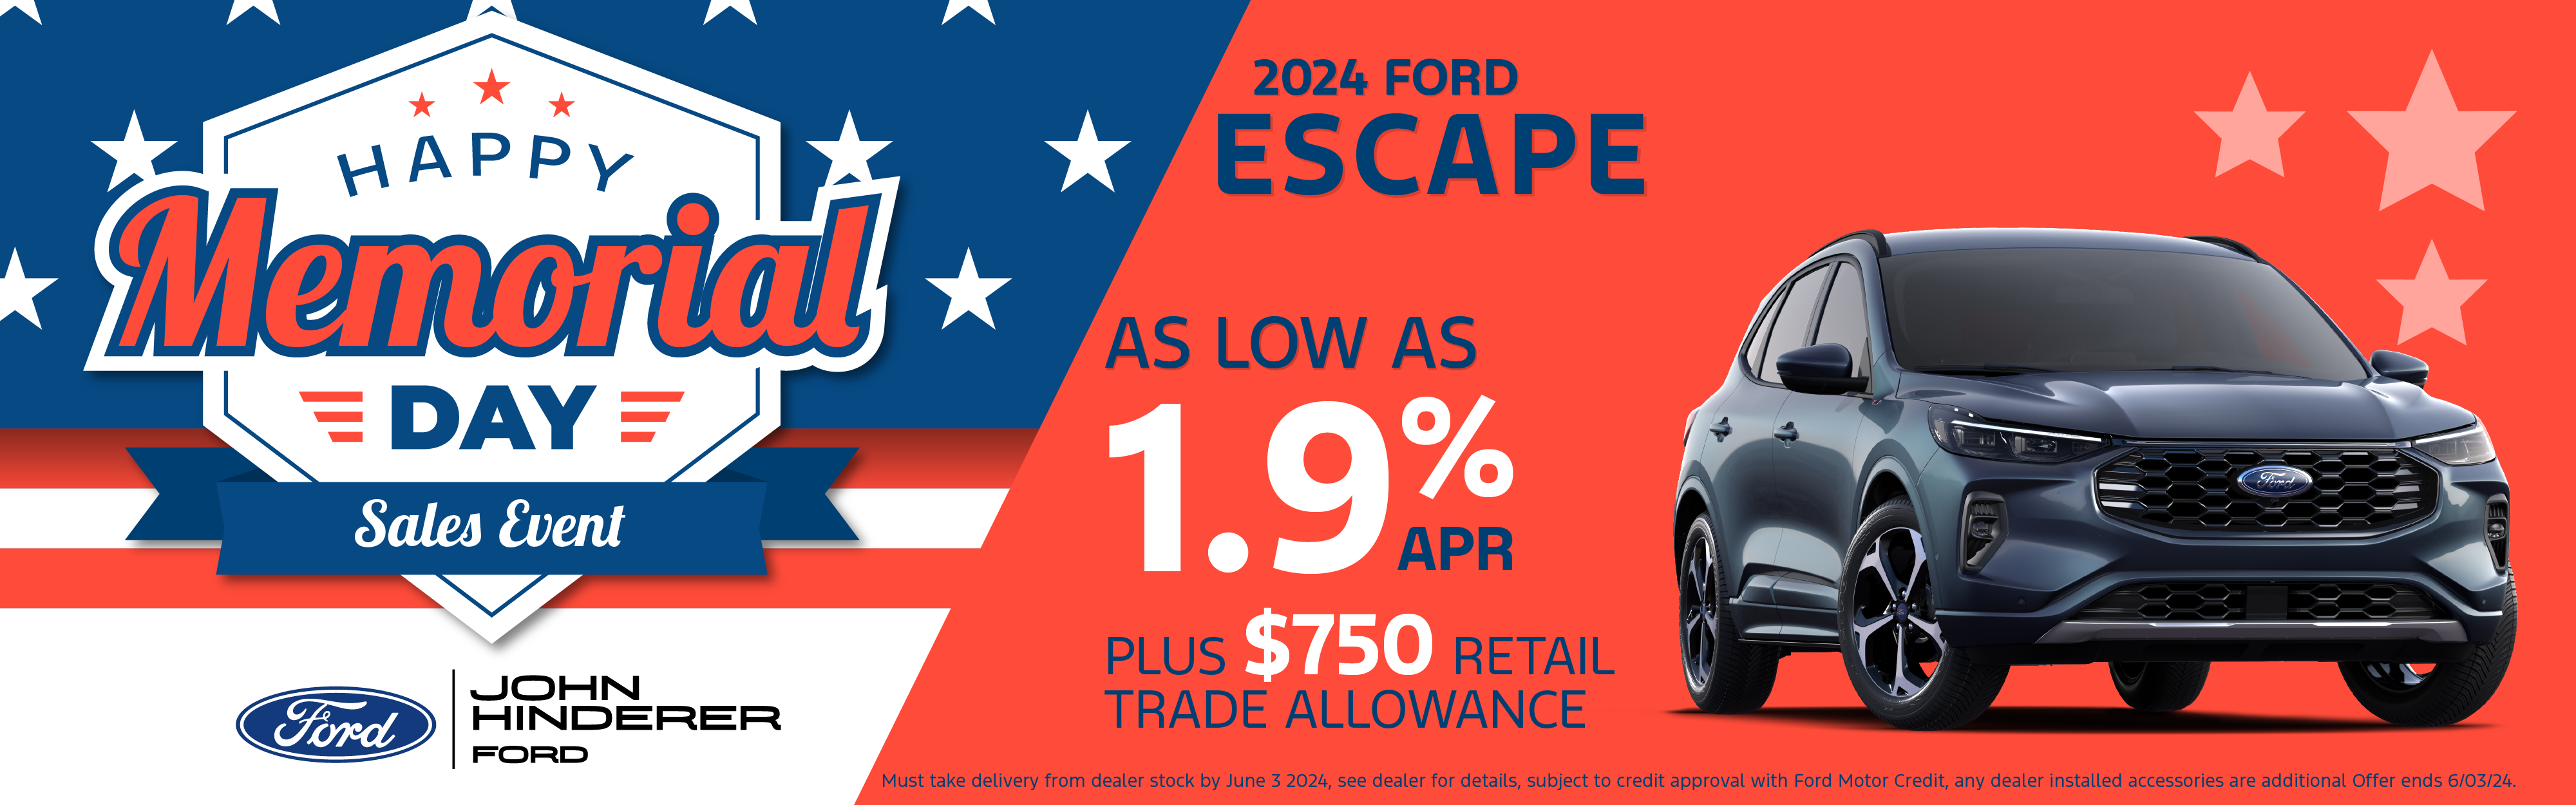 As low as 1.9% APR on 2024 Escape